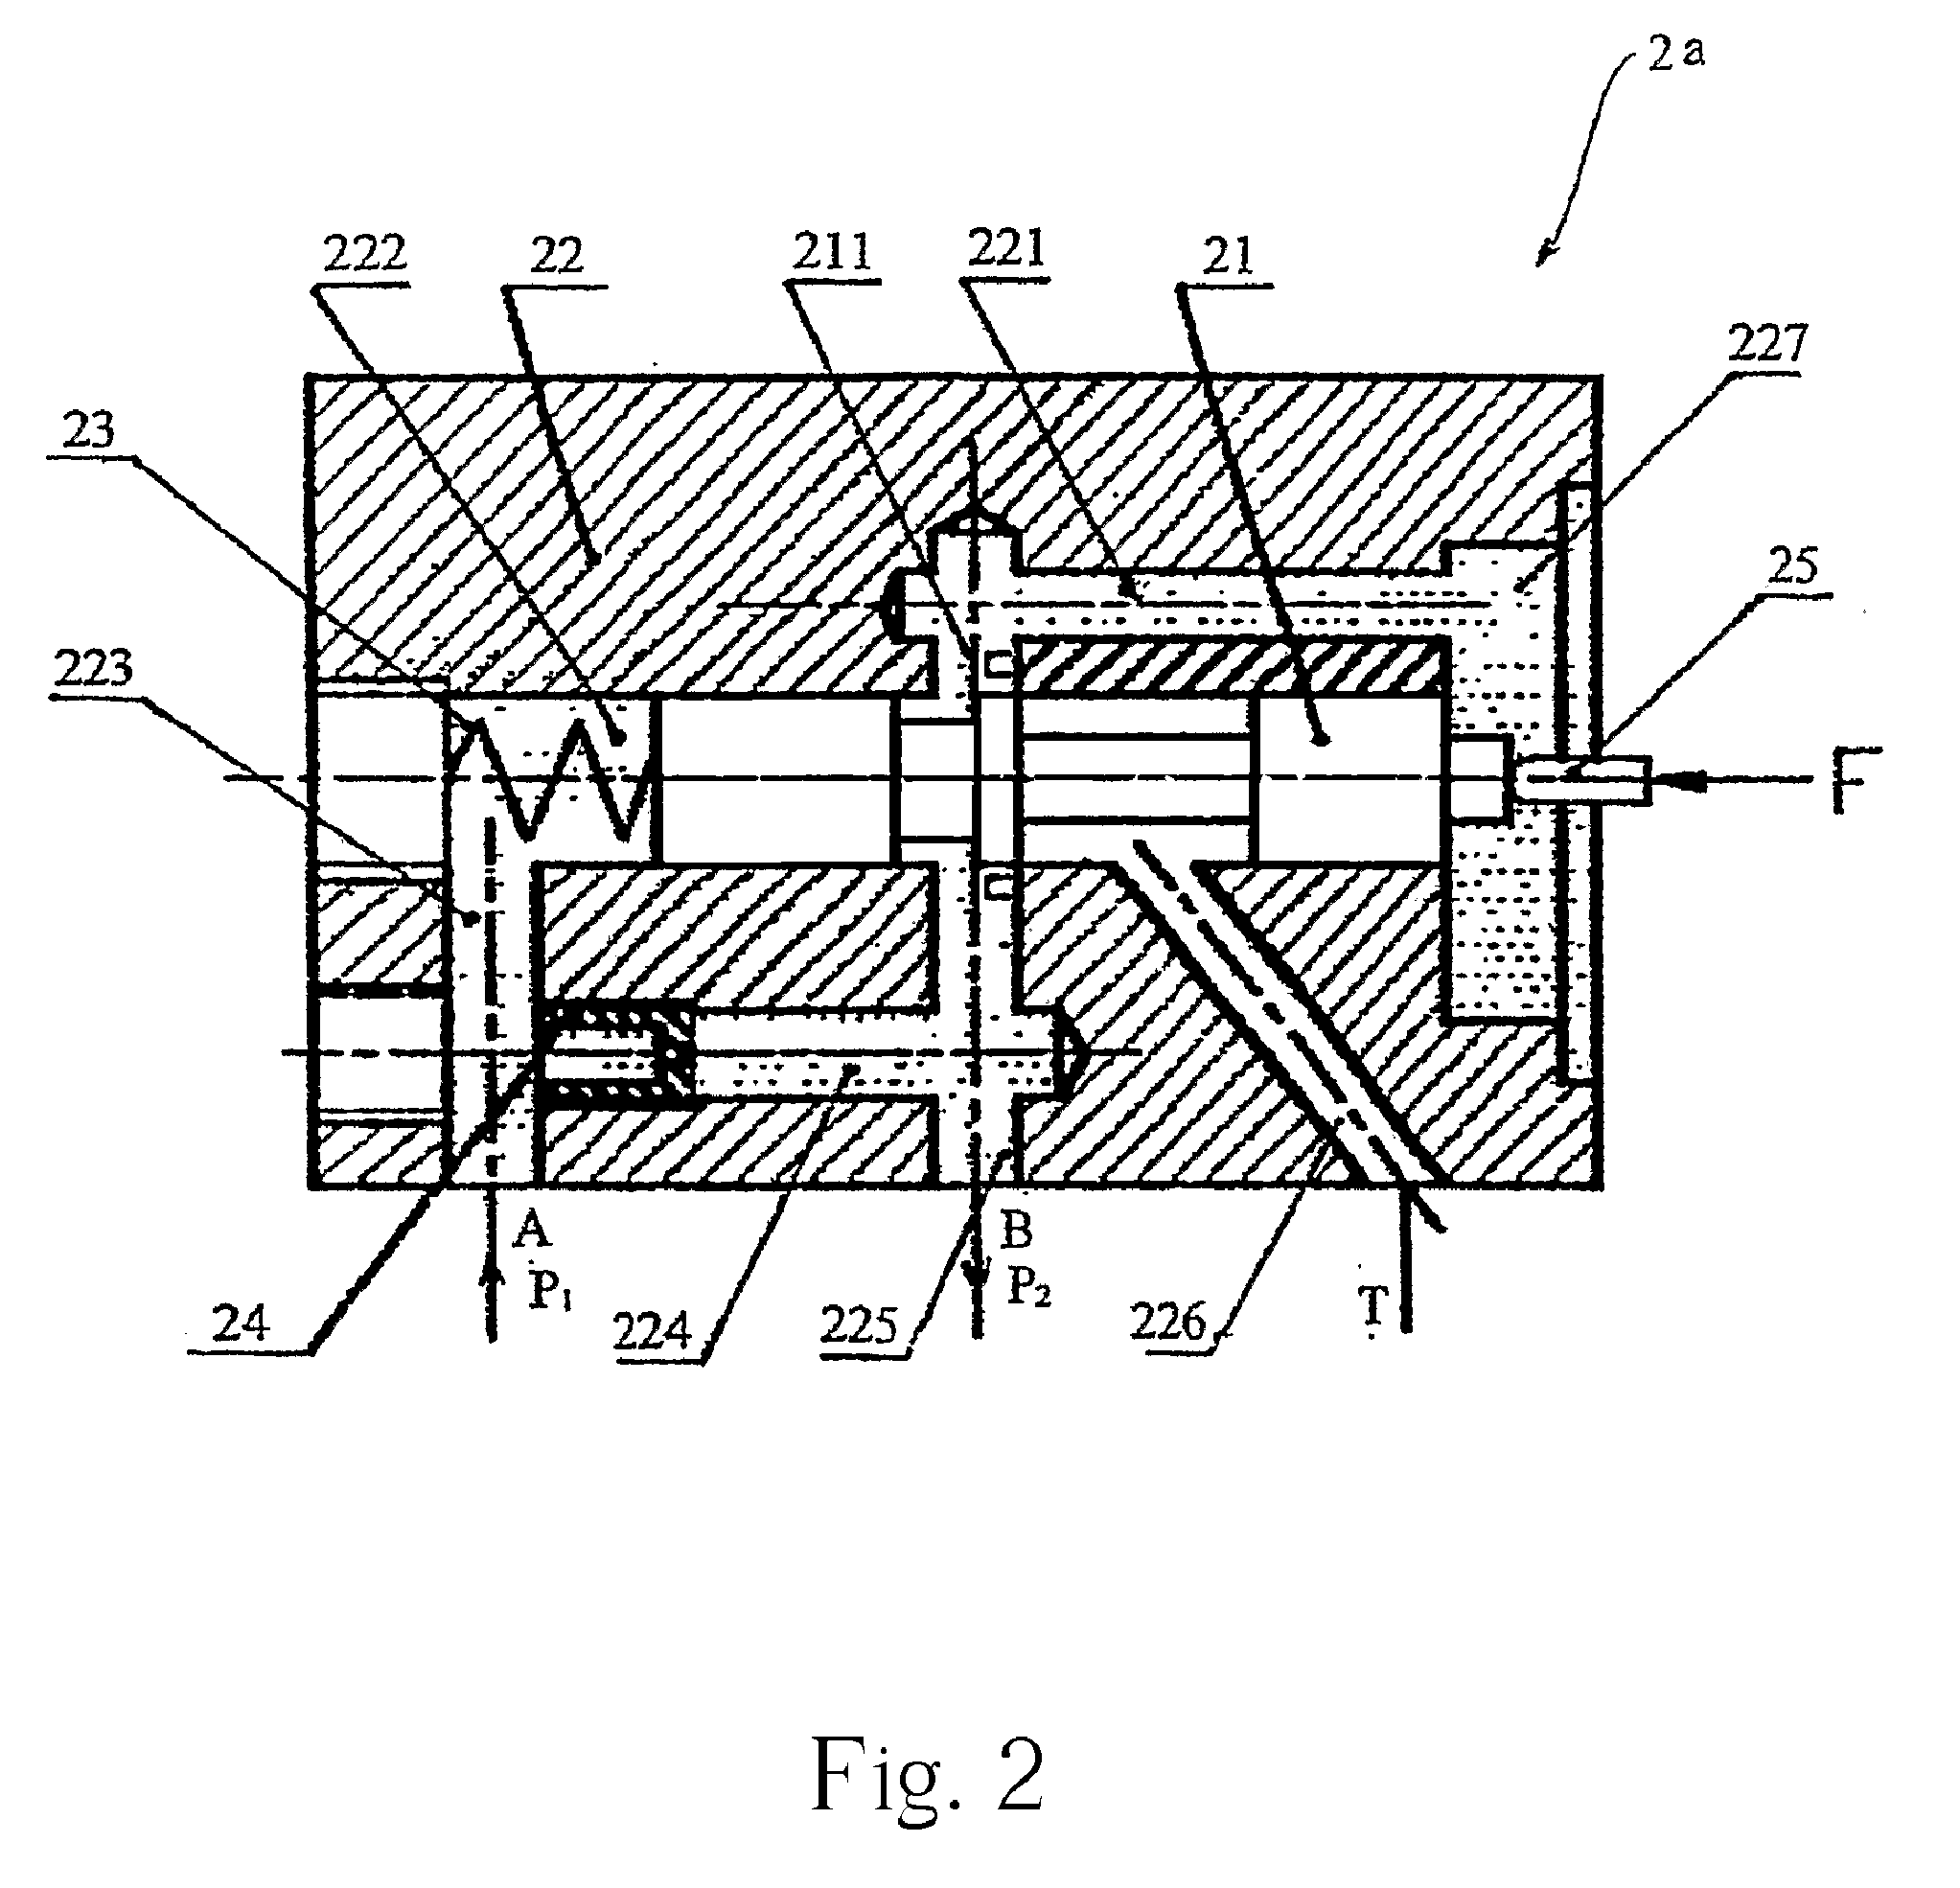 Variable engine valve control system with pressure difference